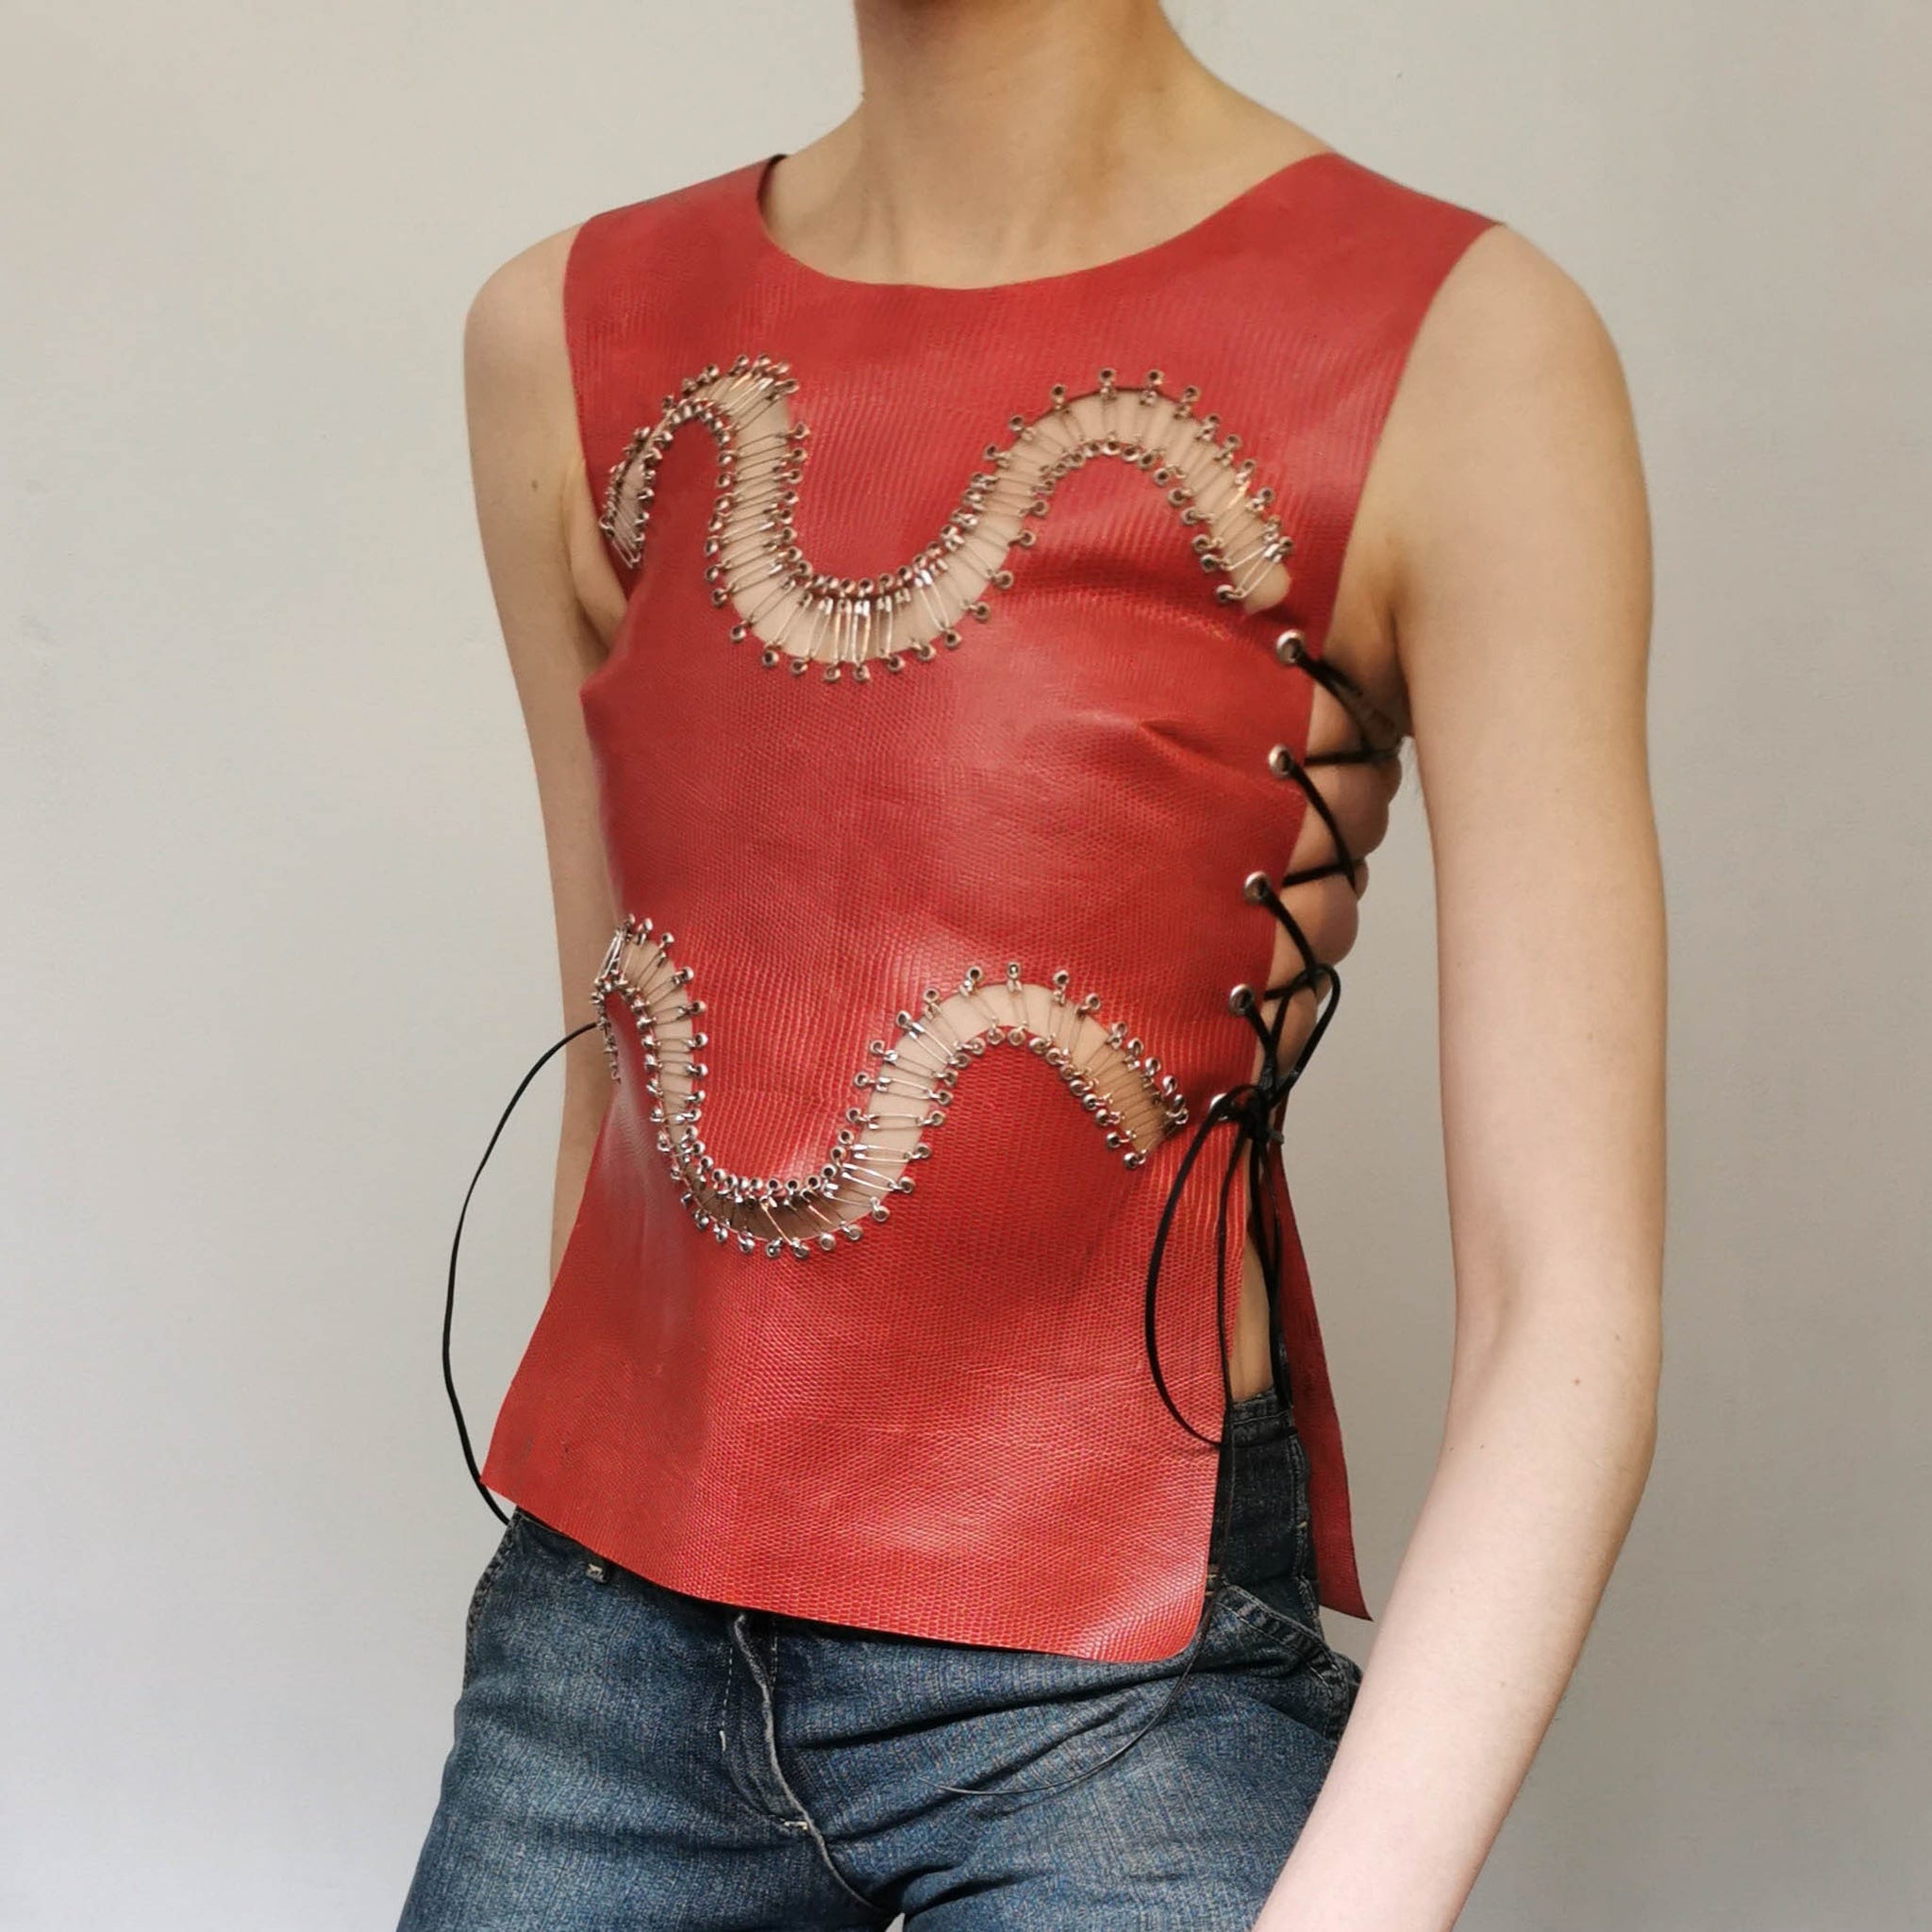 Red Leather Snakeskin Breastplate